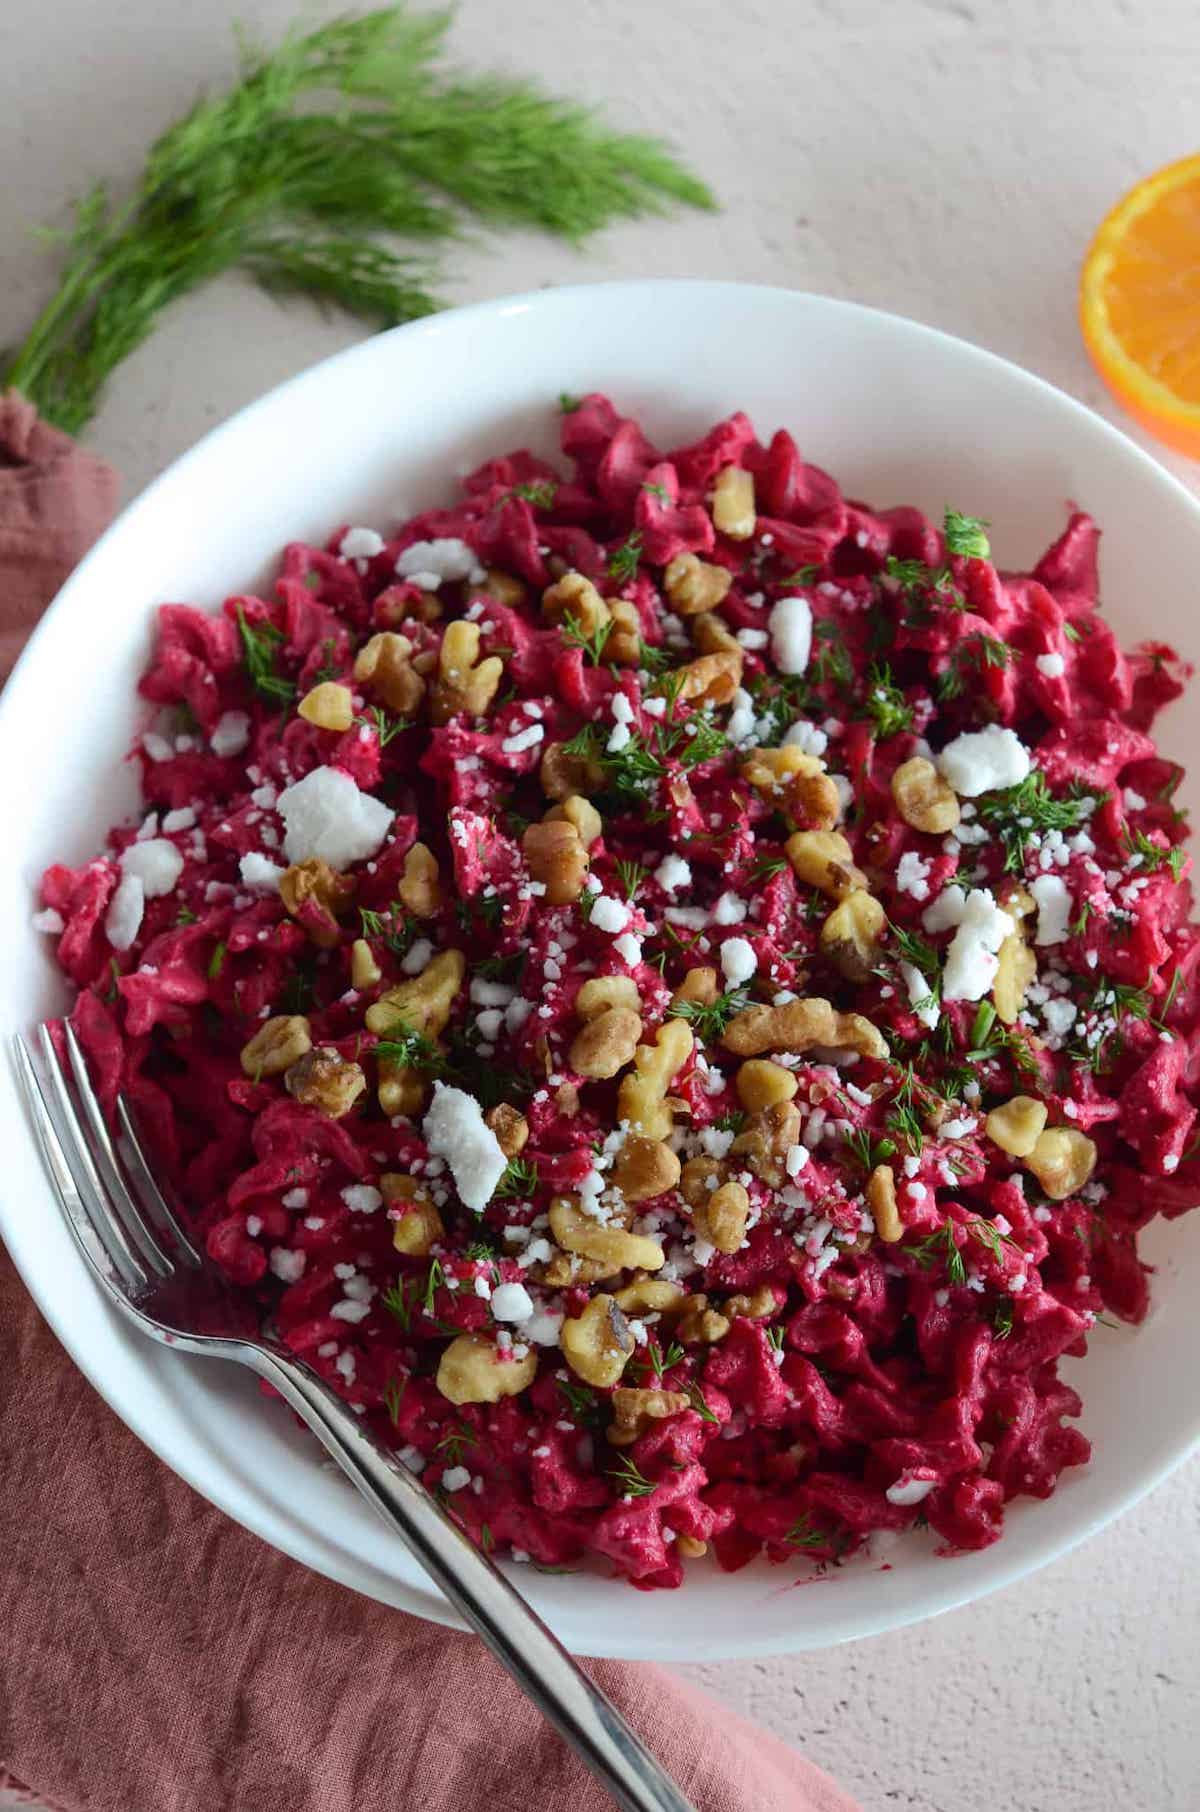 This is a photo of beet pasta sauce with walnuts, vegan feta, and dill.